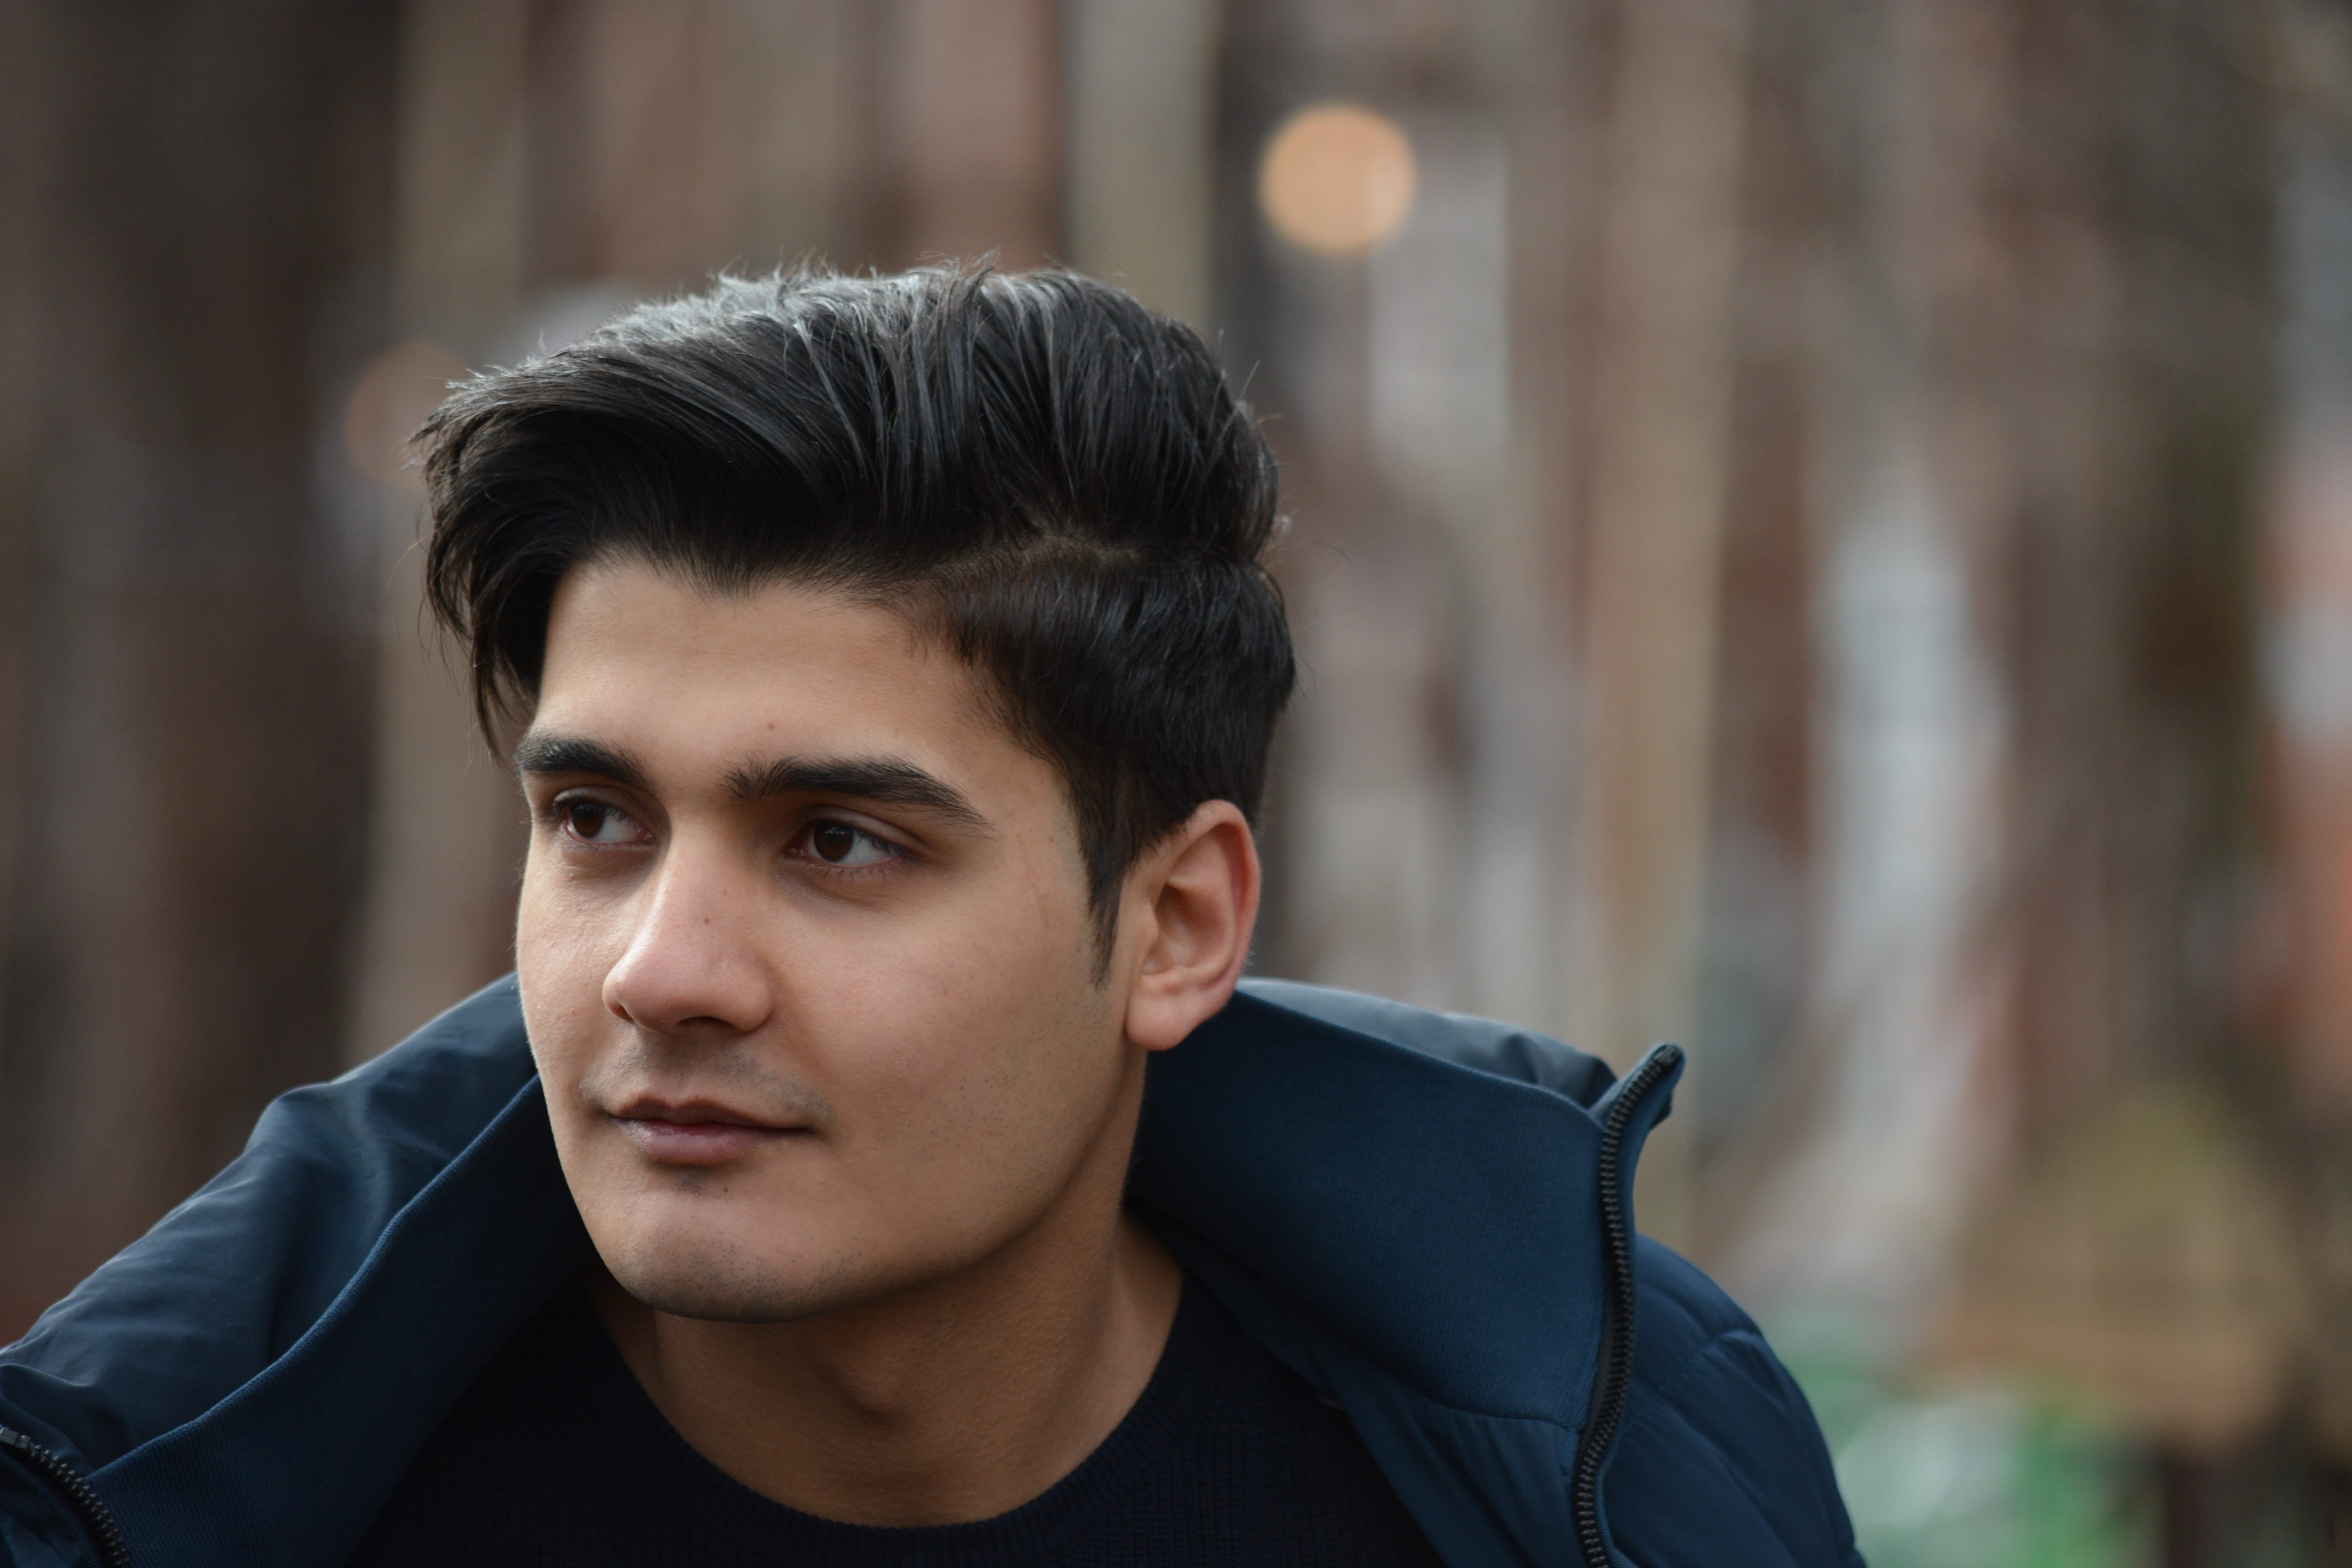 man in blue zip jacket, refugee, young man, portrait, male, person